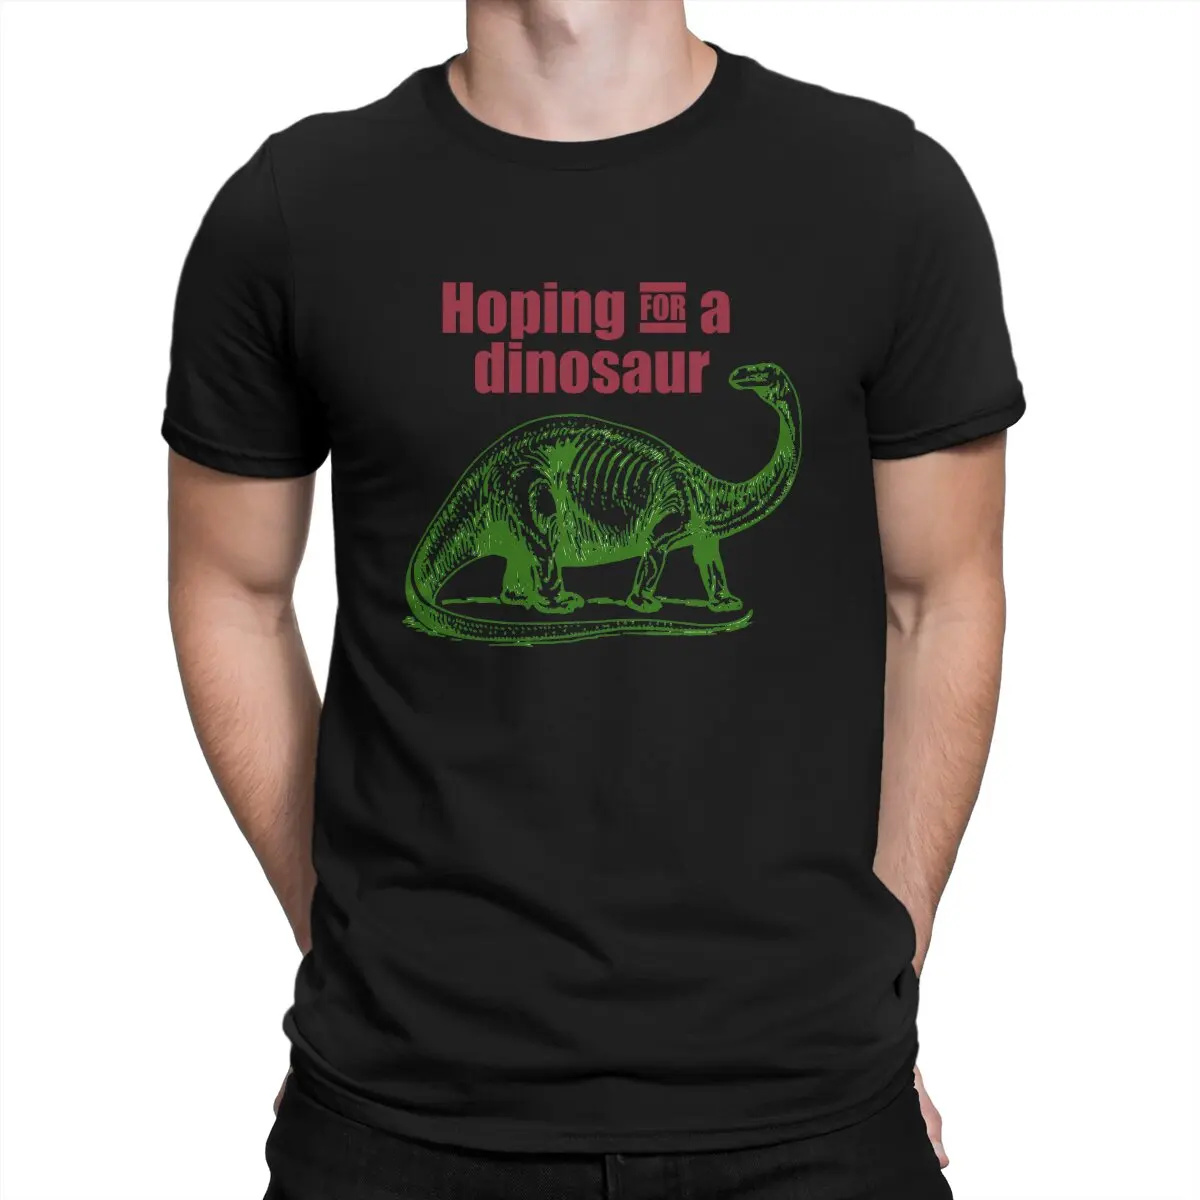 

Hoping for Dinosaur Lizard Dino Durassic T-Shirts for Men Ark Survival Evolved Game Vintage Cotton Tees Short Sleeve T Shirts